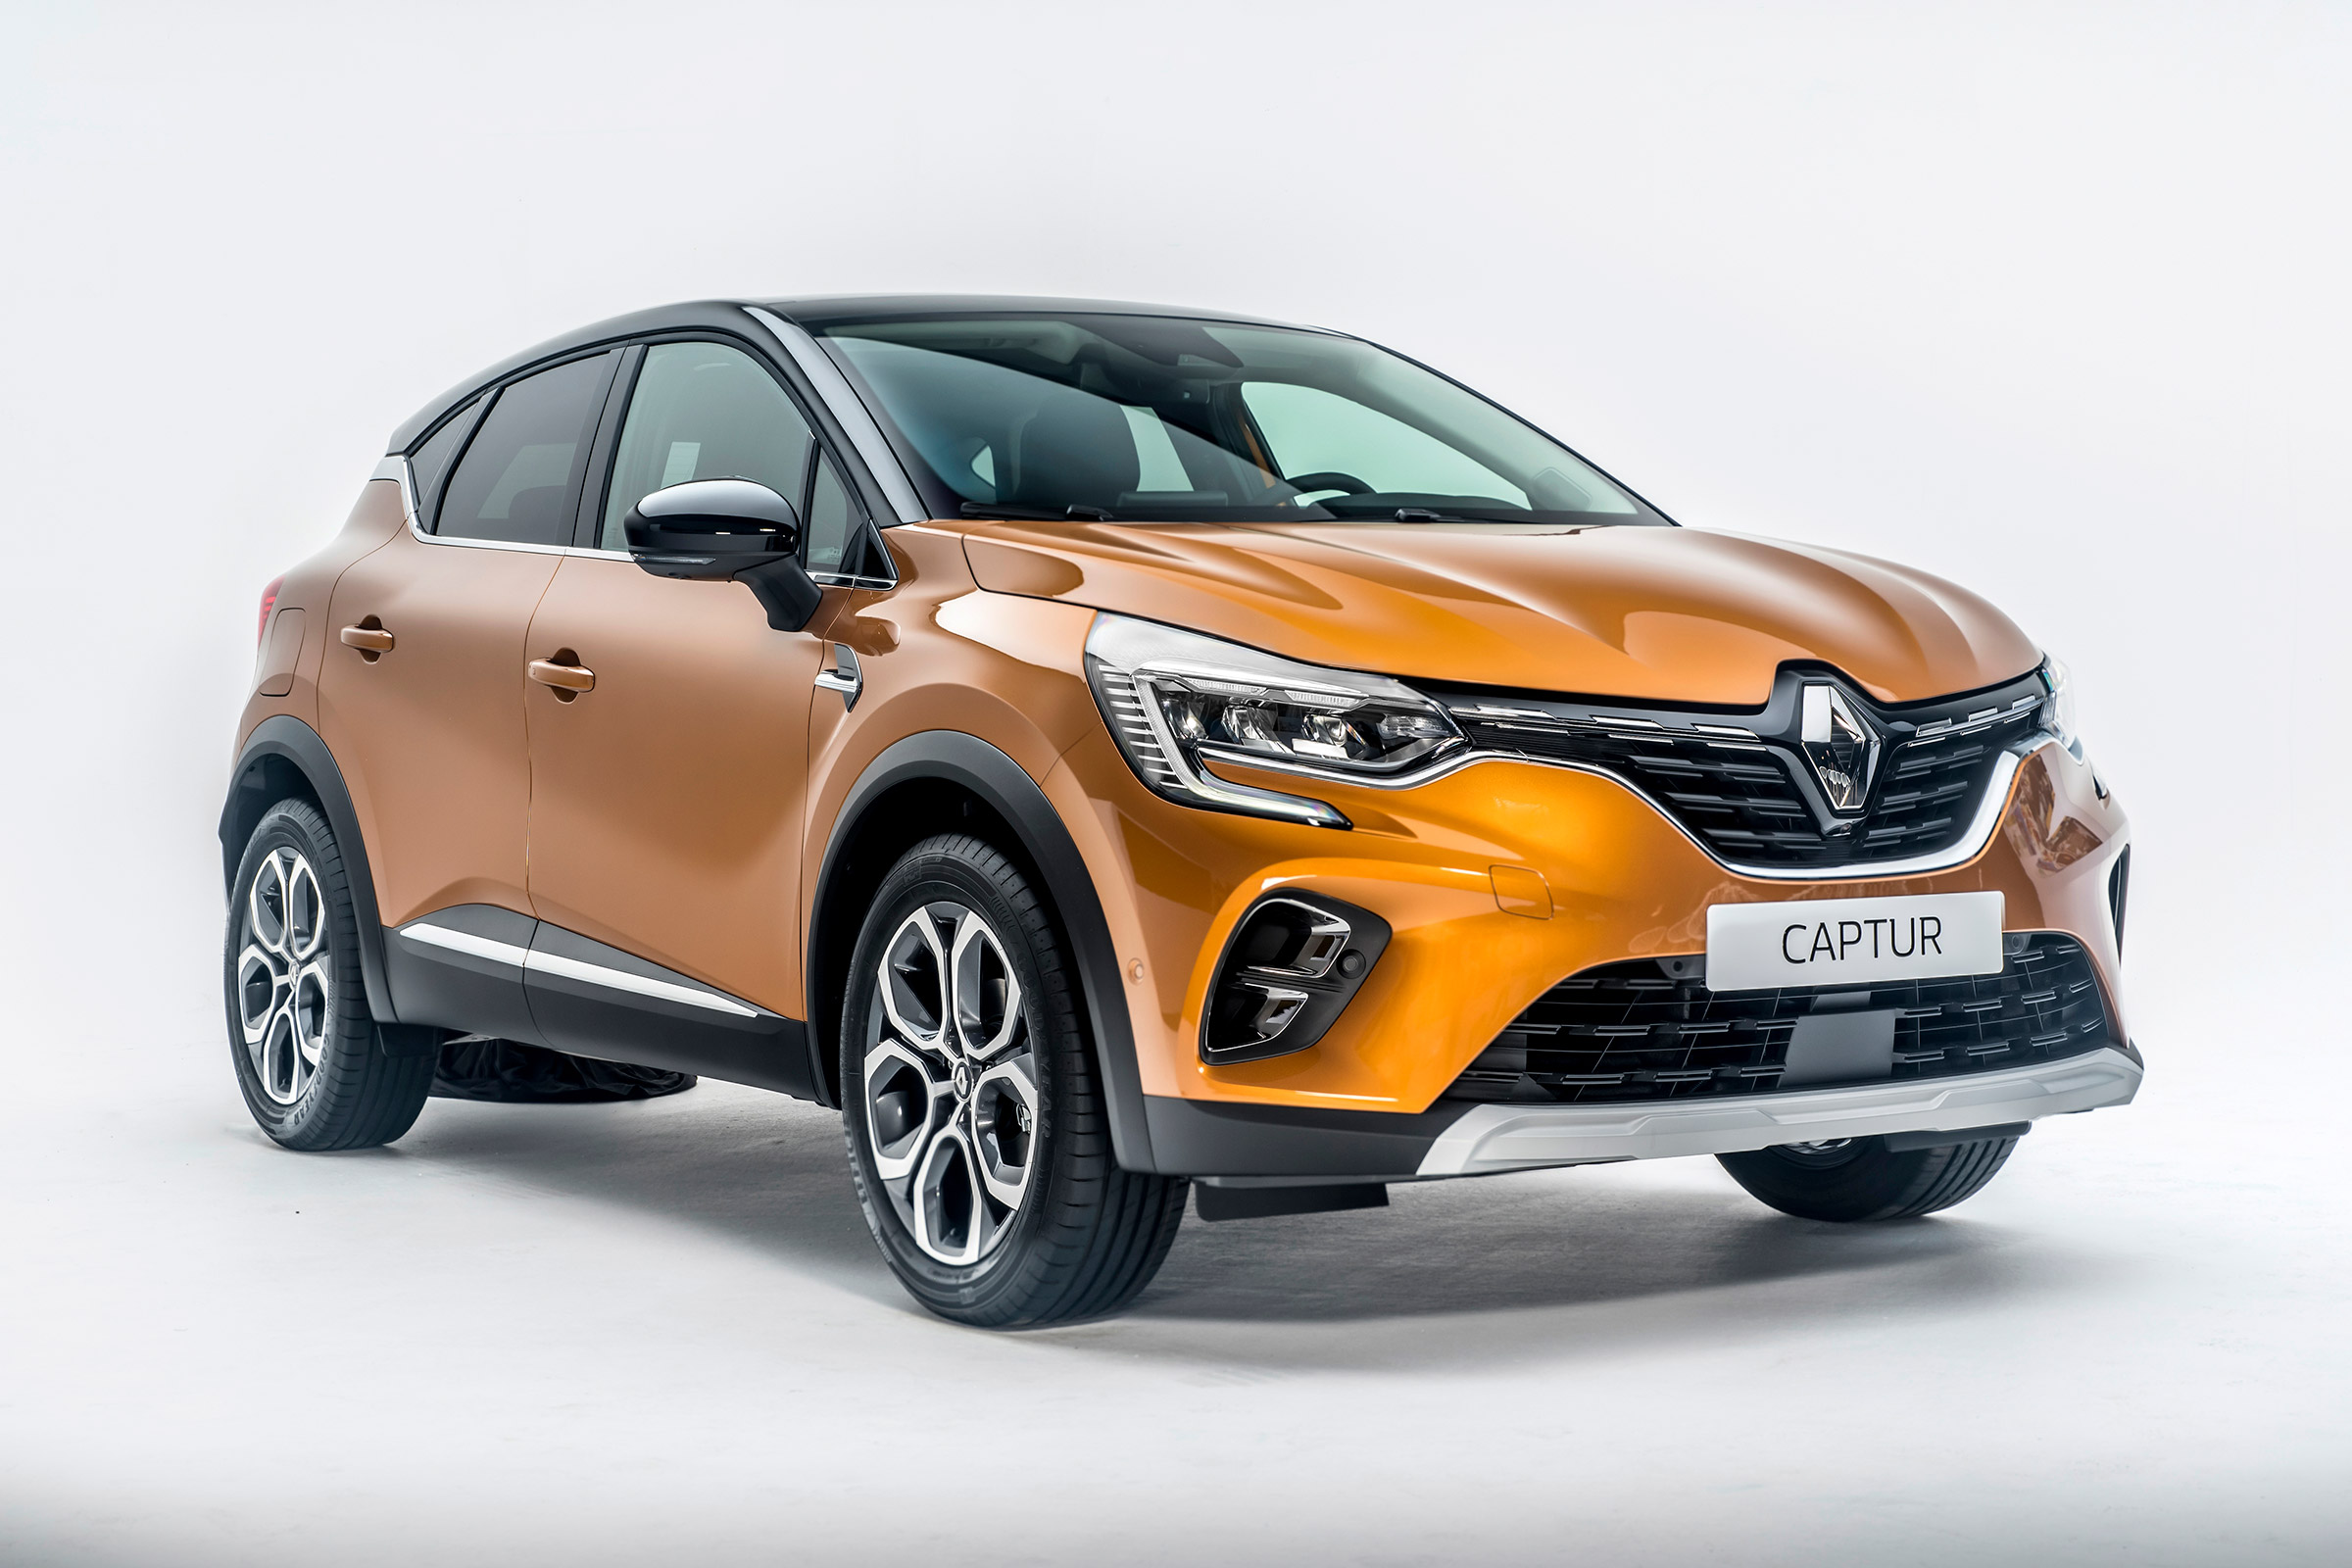 New 2020 Renault Captur plugin hybrid ETech priced from